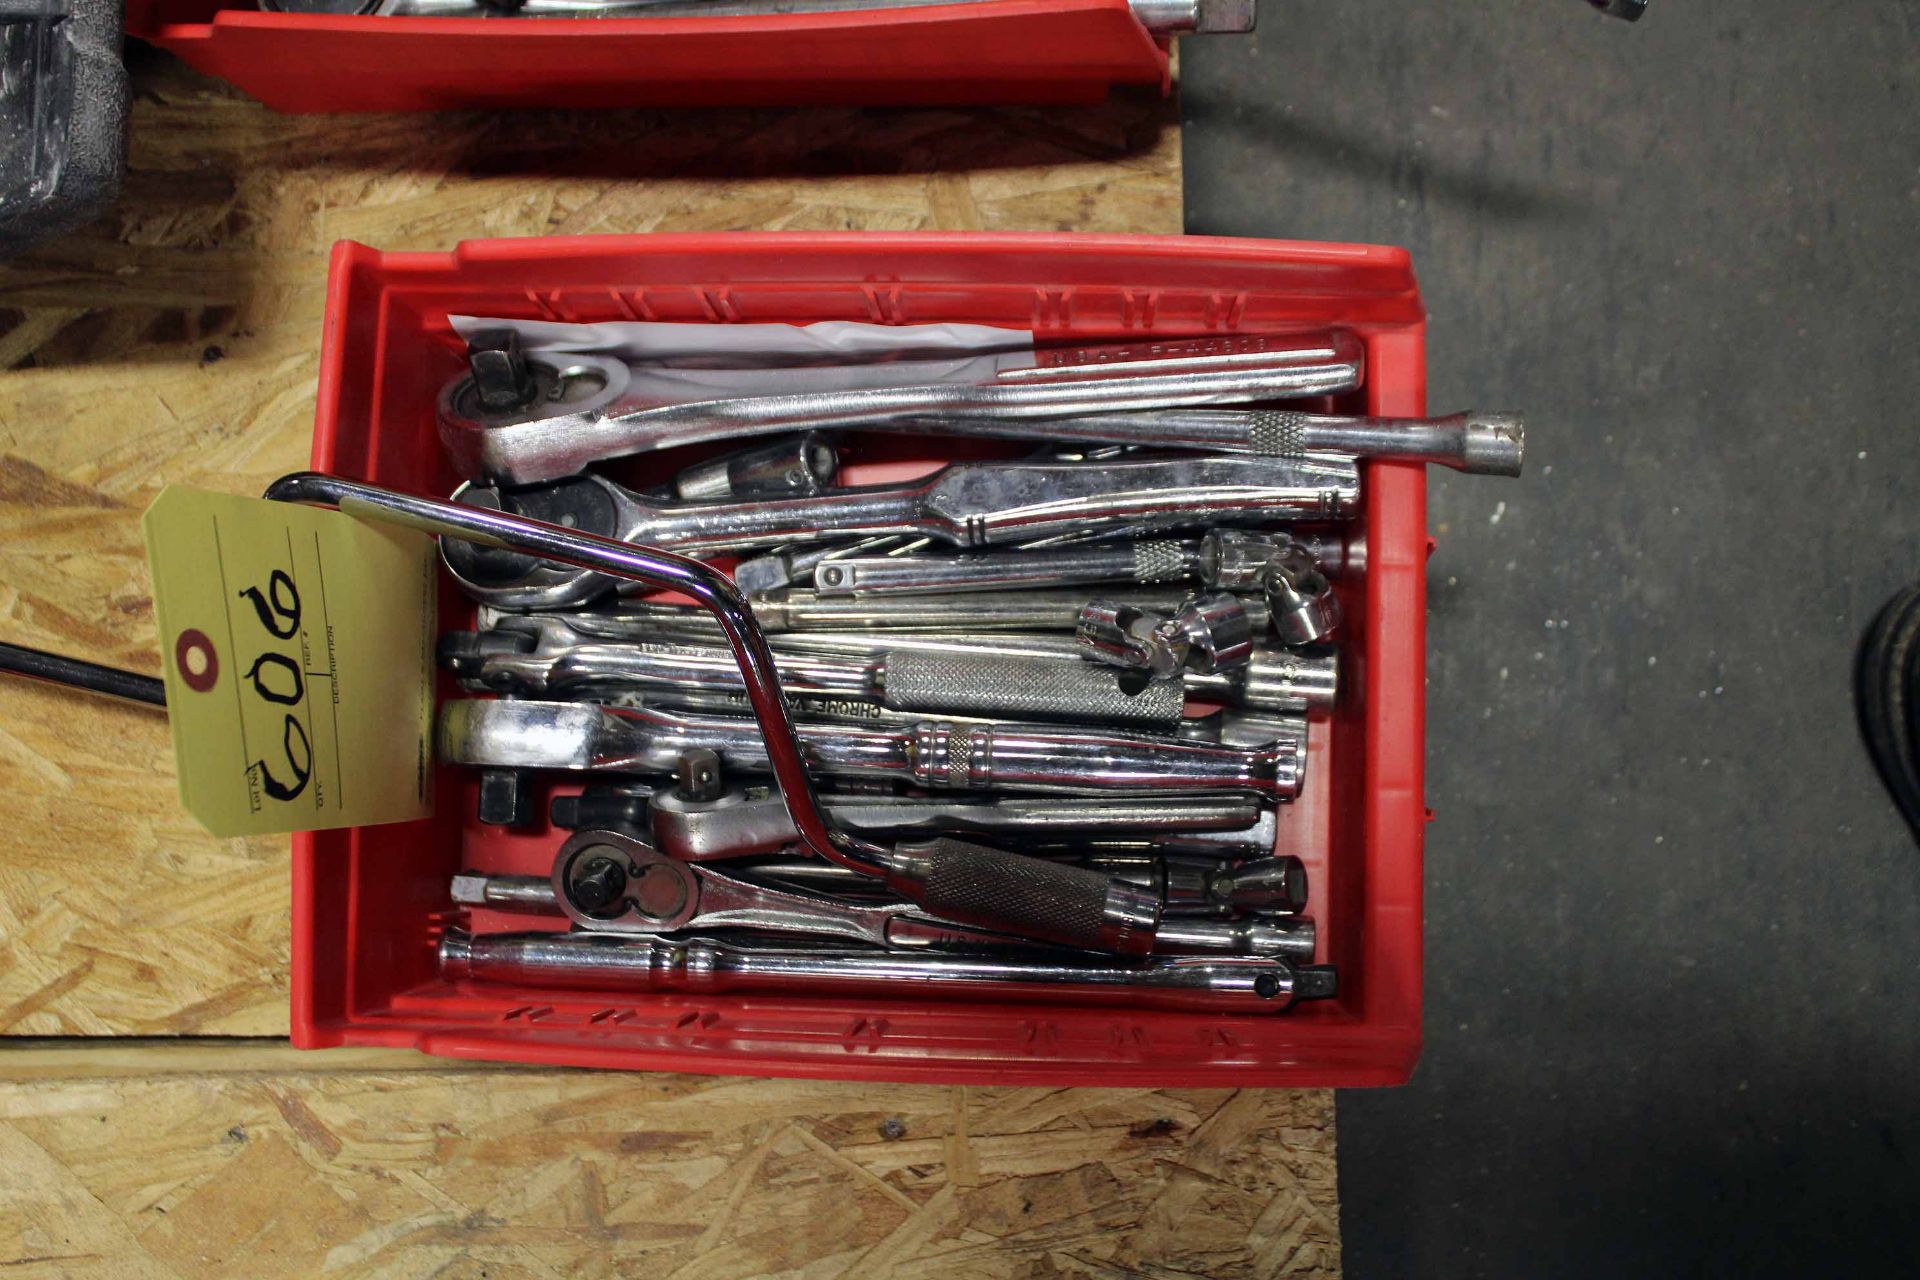 LOT CONSISTING OF: 1/2" & 3/8" drive ratchets, break over bars, extensions, etc.